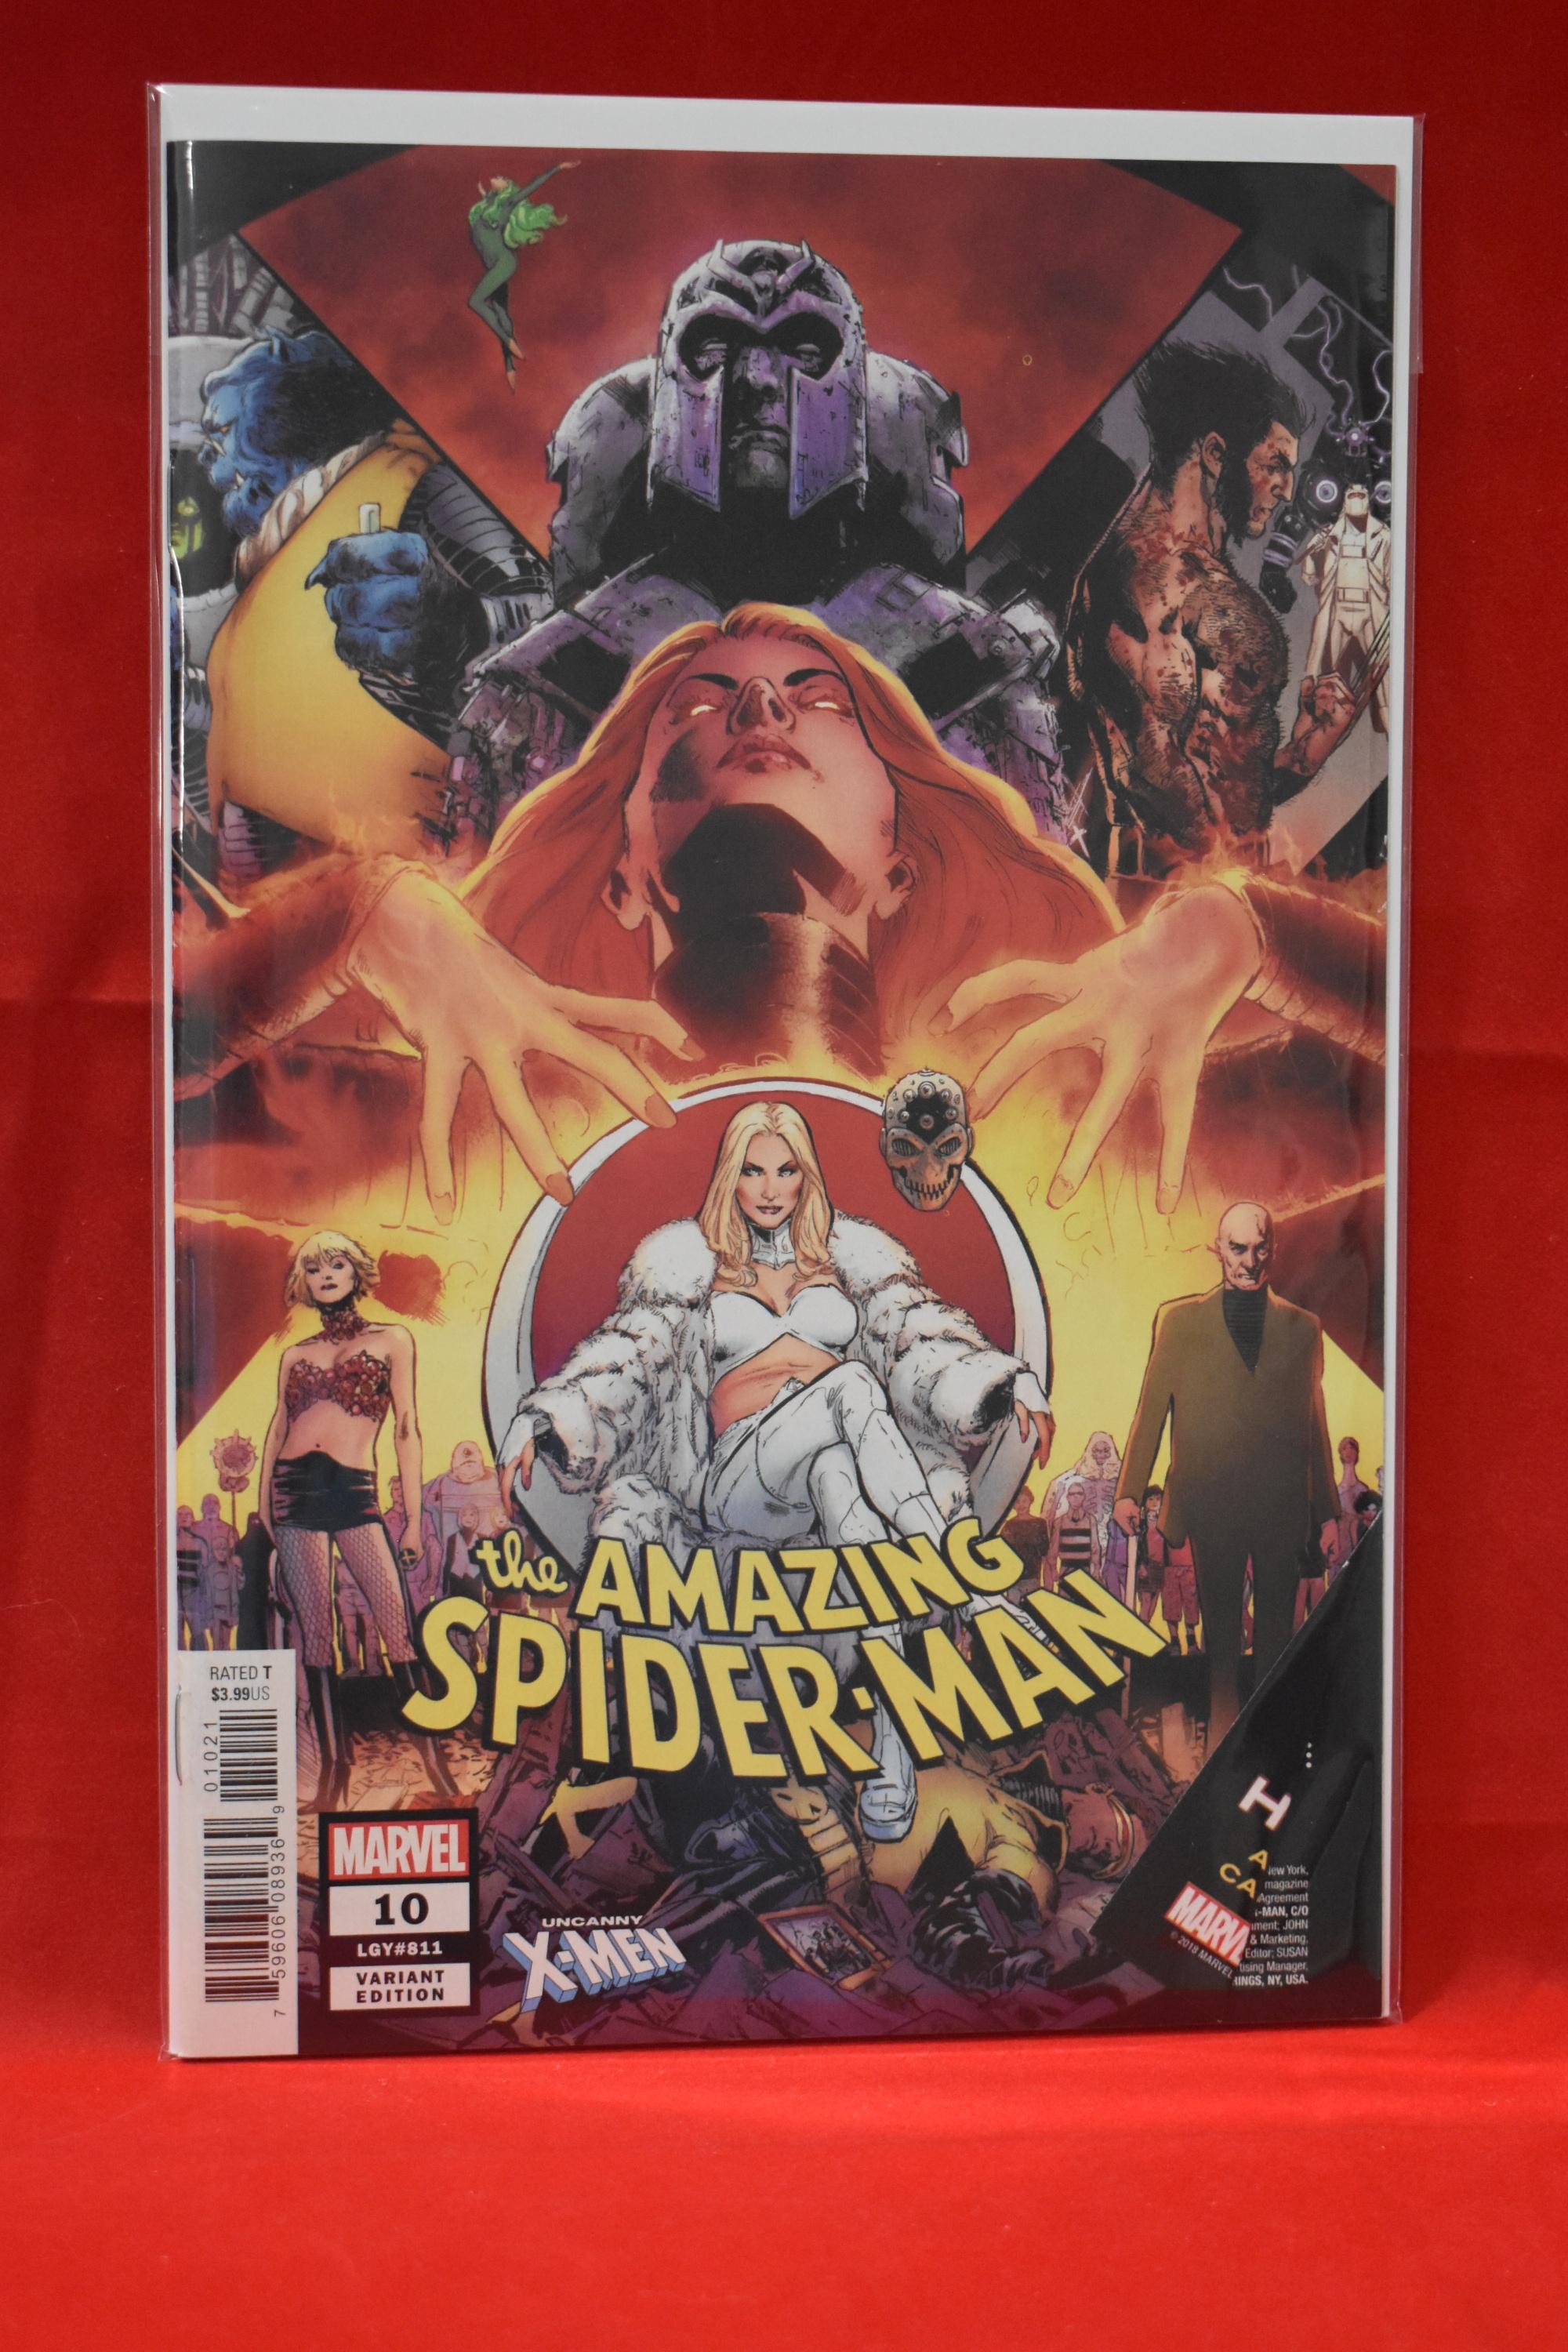 AMAZING SPIDER-MAN #10 | EMMA FROST VARIANT COVER